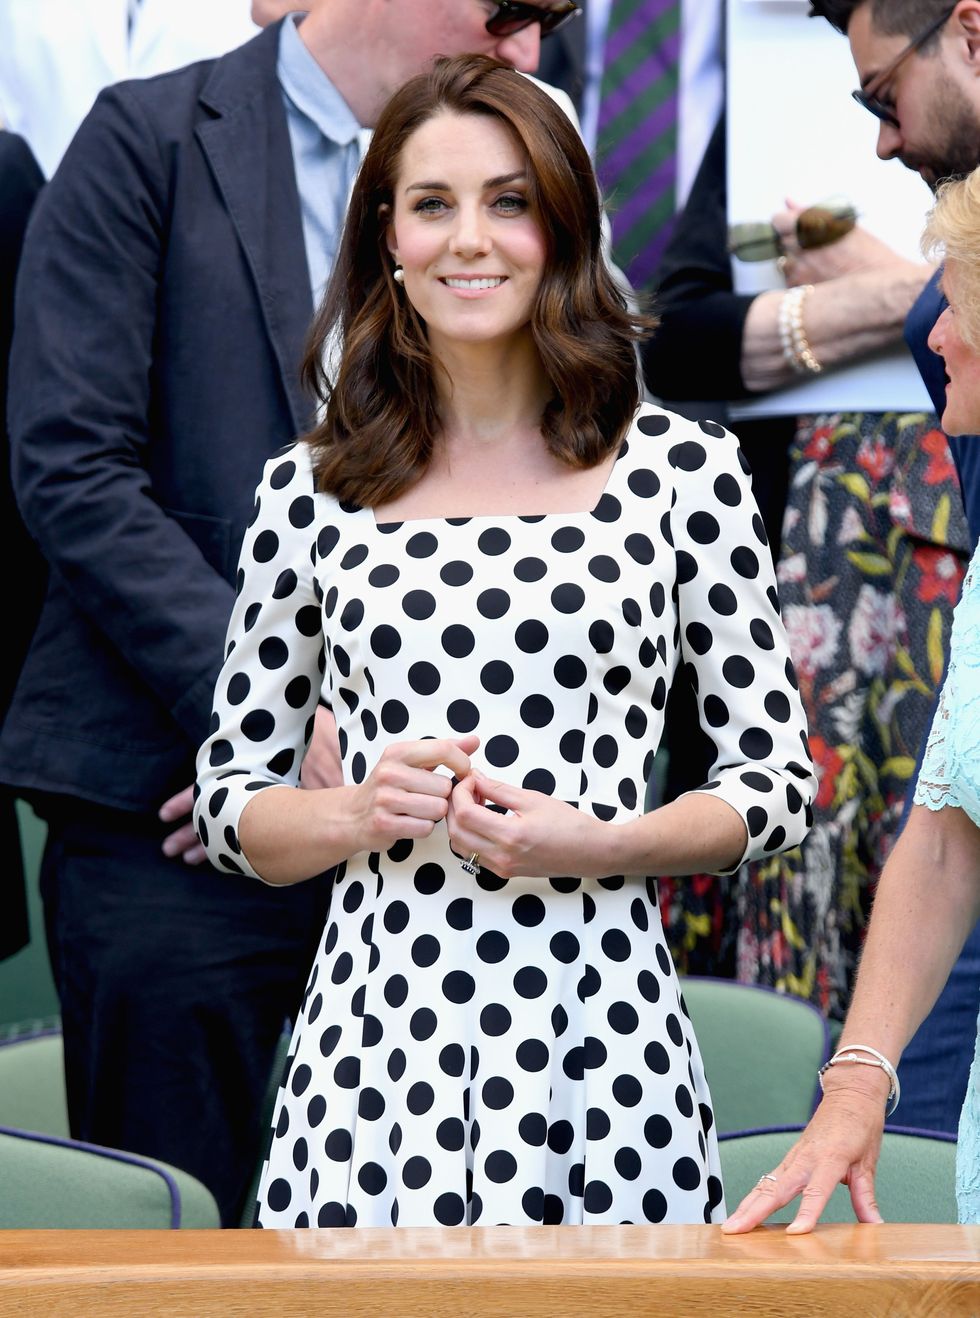 LONDON, ENGLAND - JULY 03:  Catherine, Duchess of Cambridge attends the opening day of Wimbledon 2017 on July 3, 2017 in London, England.  (Photo by Karwai Tang/WireImage)